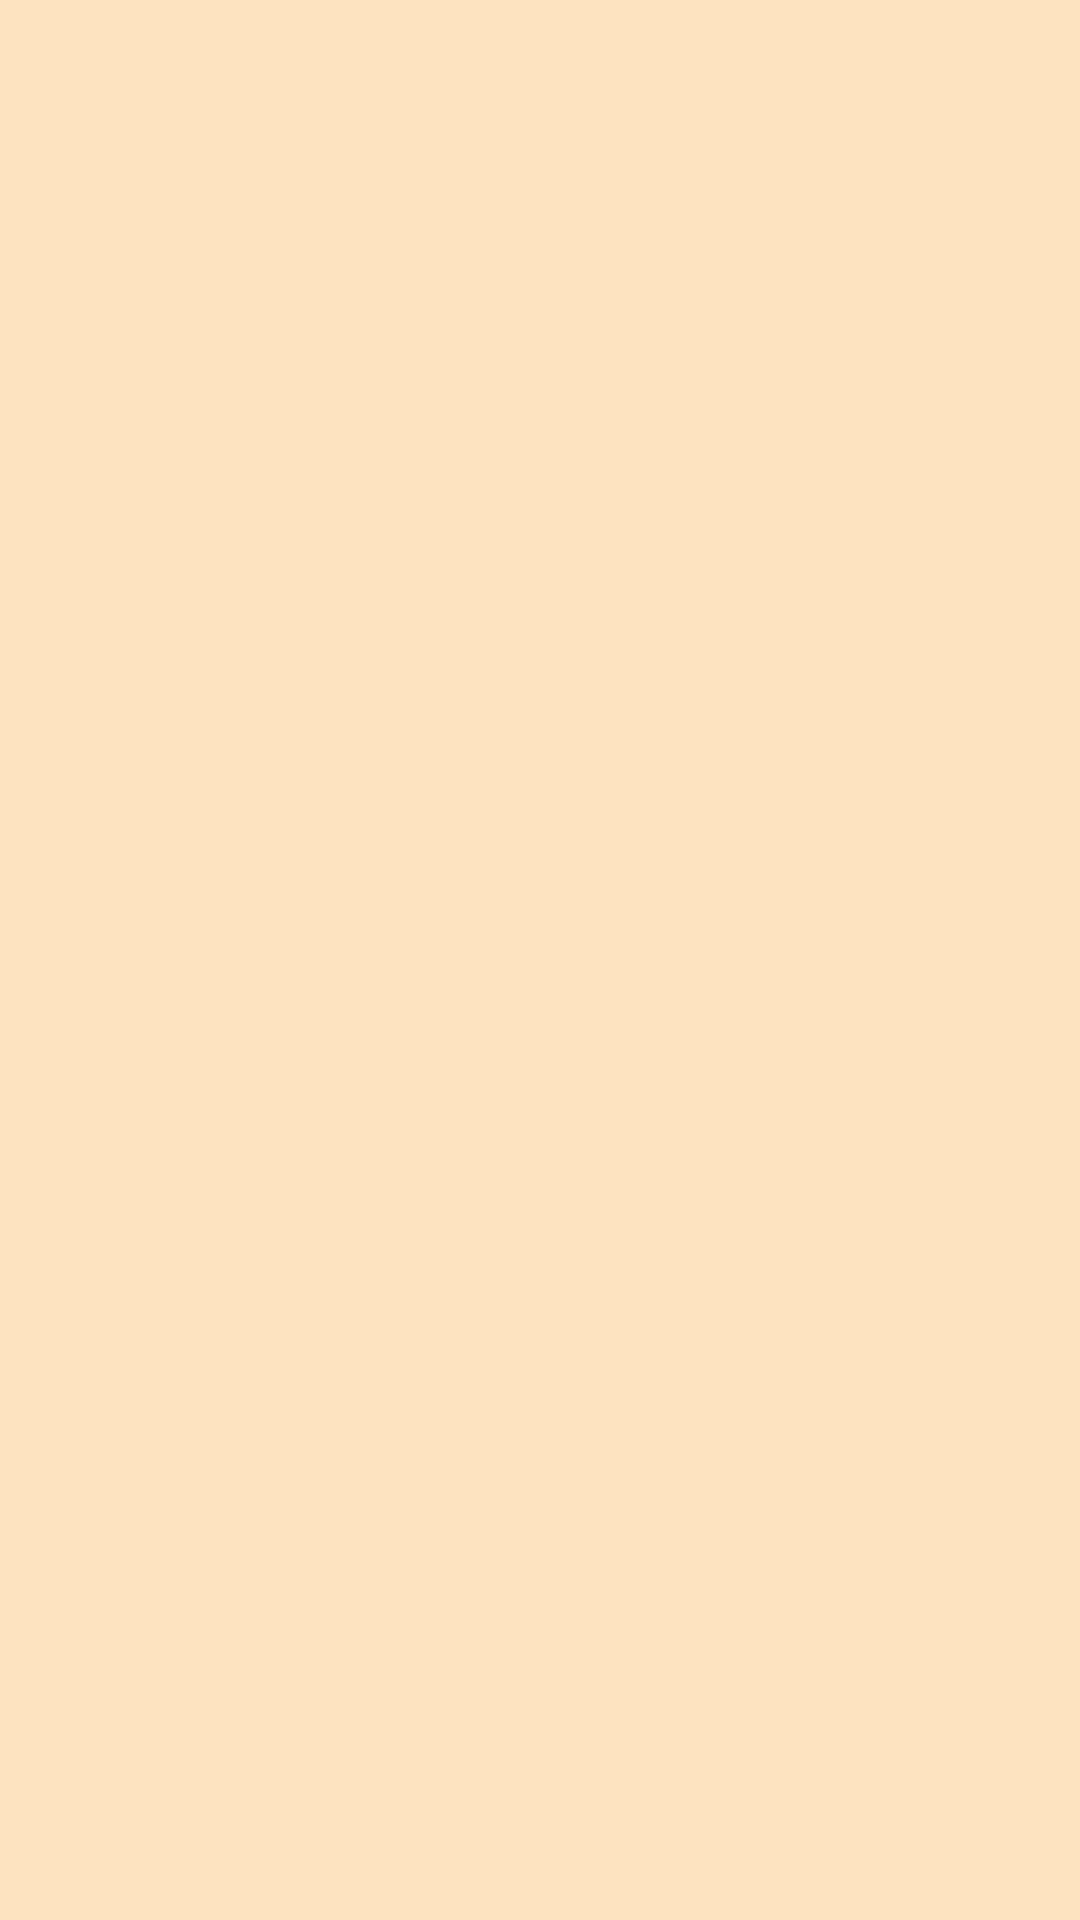 1080x1920 Bisque Solid Color Background